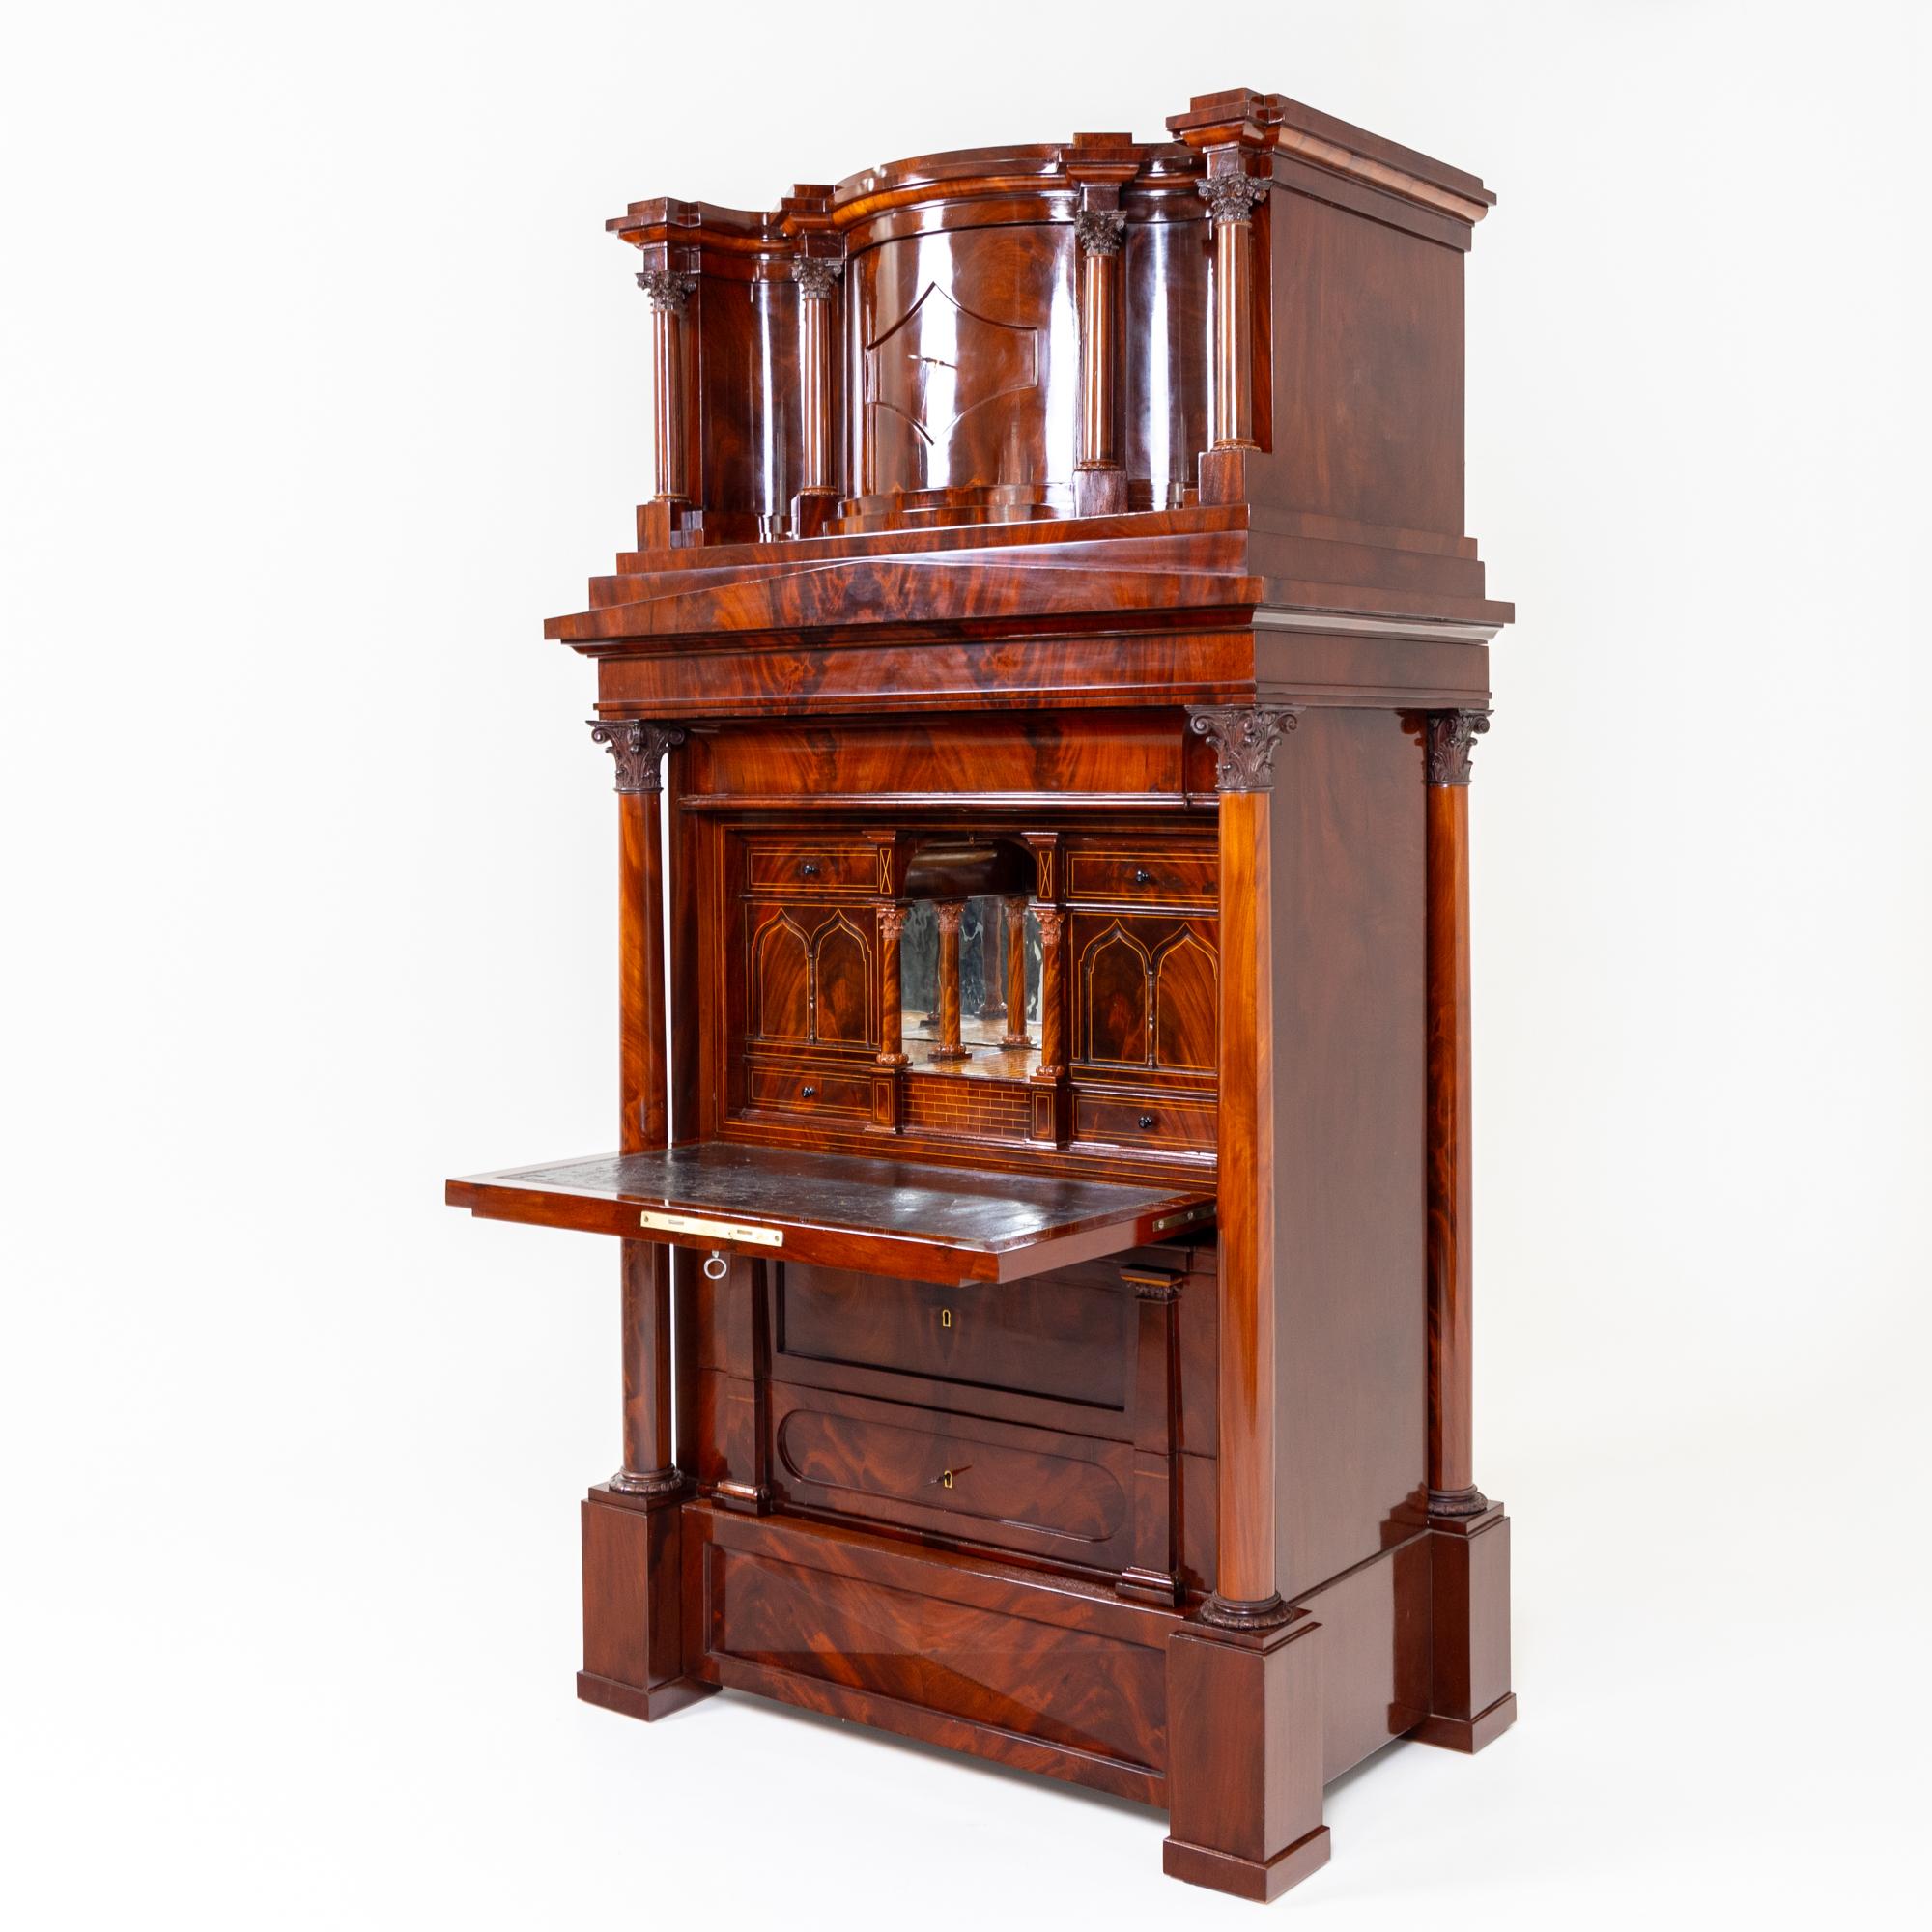 Large Berlin top secretaire from the 1830s made of solid and veneered mahogany. The secretaire rests on a high plinth with a drawer and faceted front. Above it rise two lateral full columns with bases, smooth shafts and Corinthian capitals. The